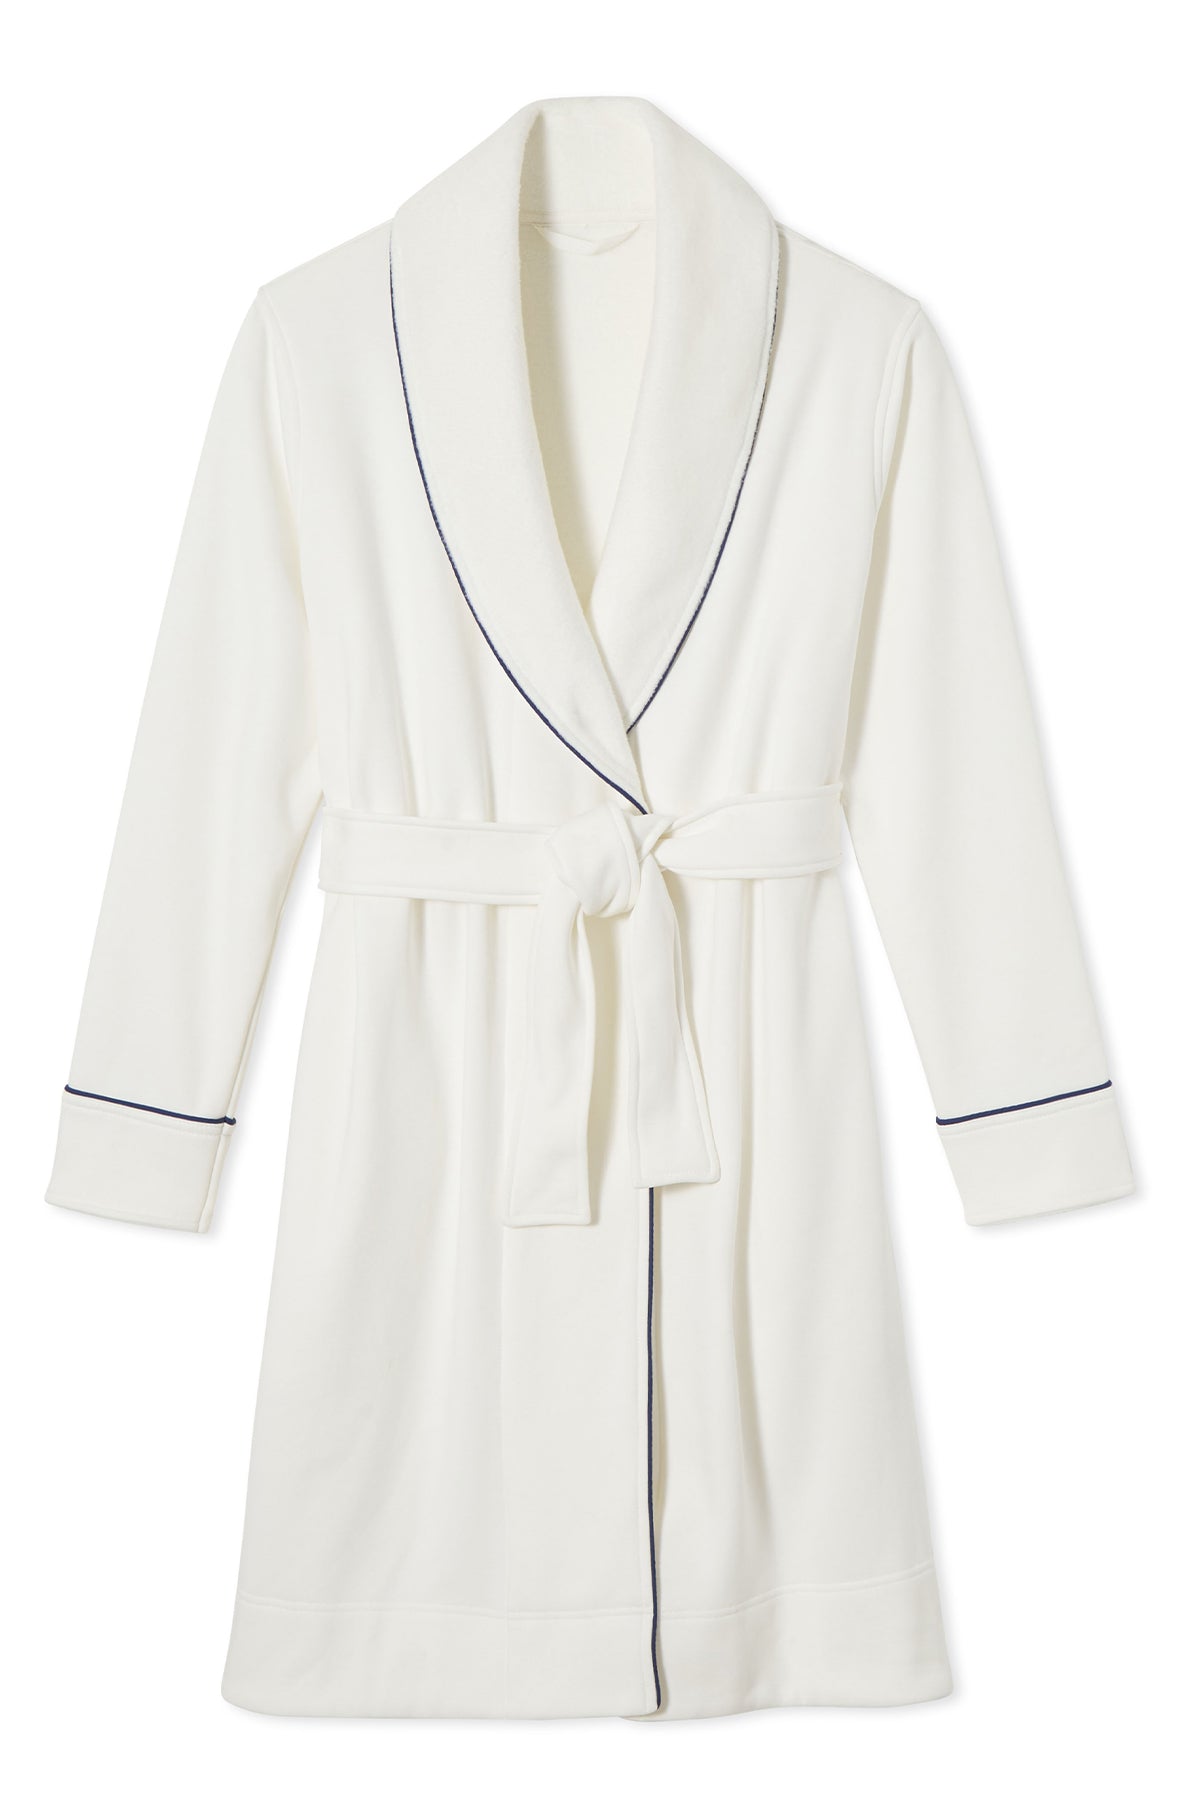 LAKE | Pima Cotton Pajamas | Robes | Gifts for Wife, Mom, or Friend